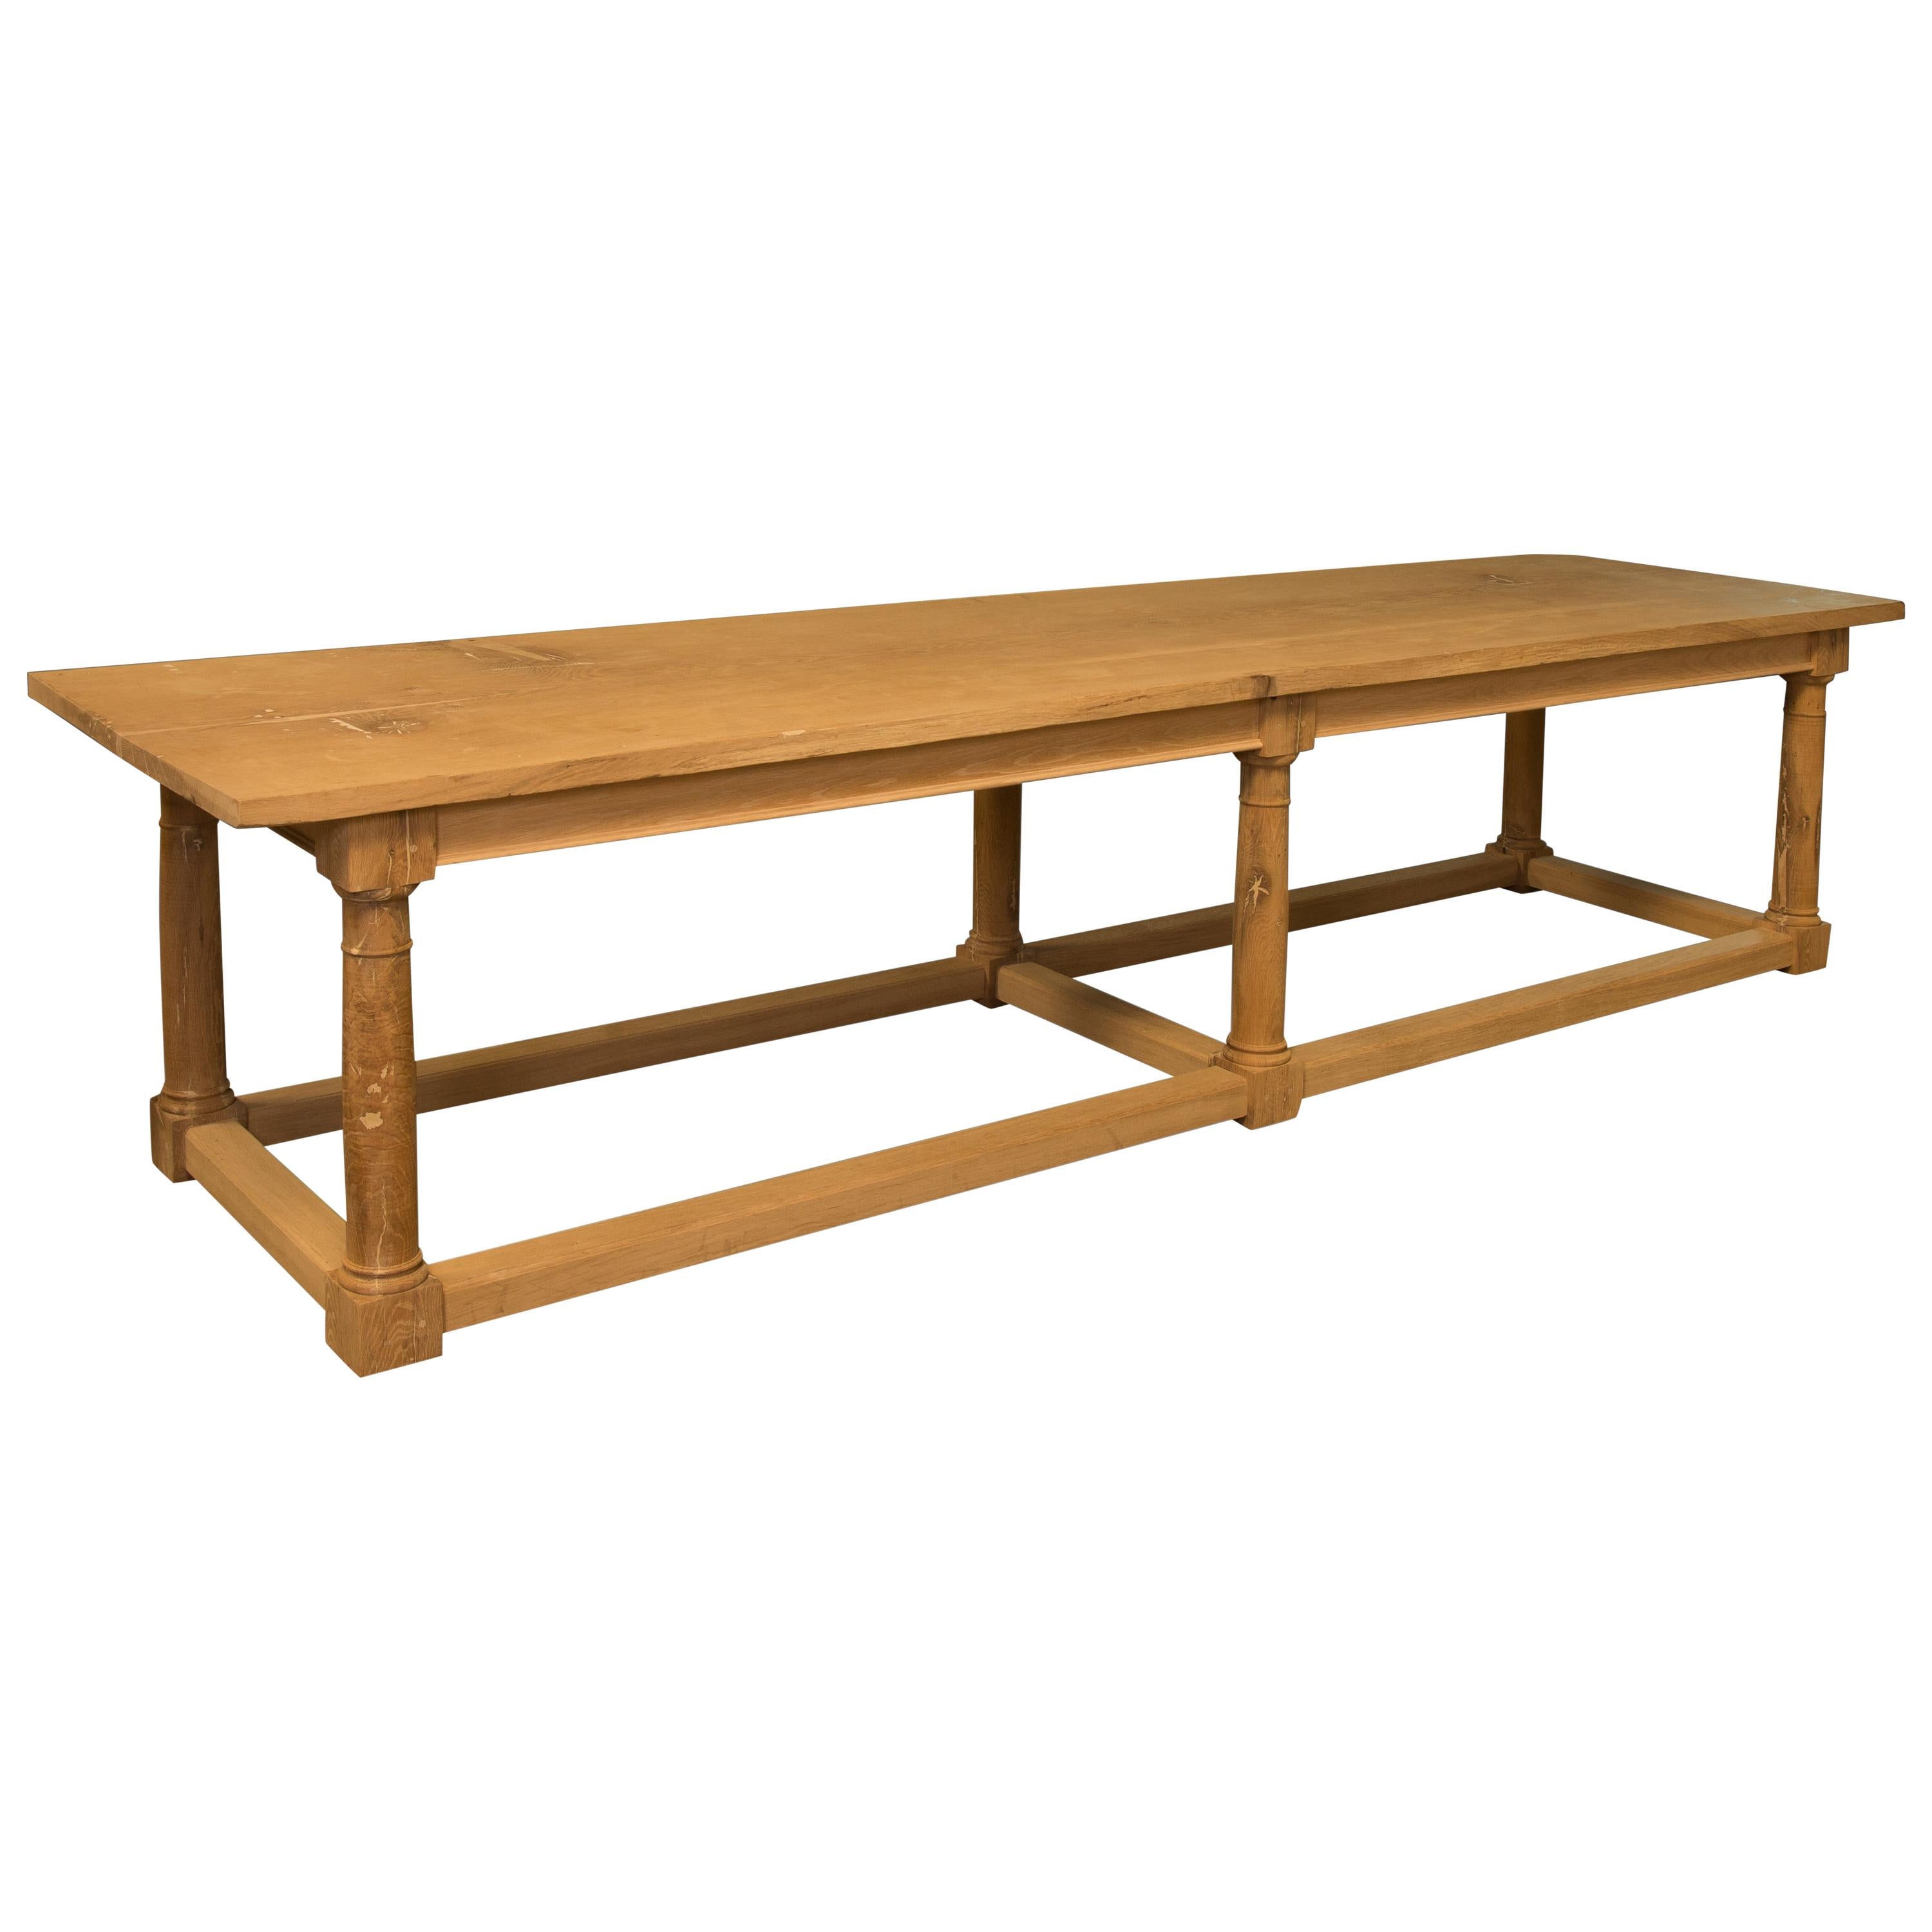 Contemporary refectory table. Oak wood.